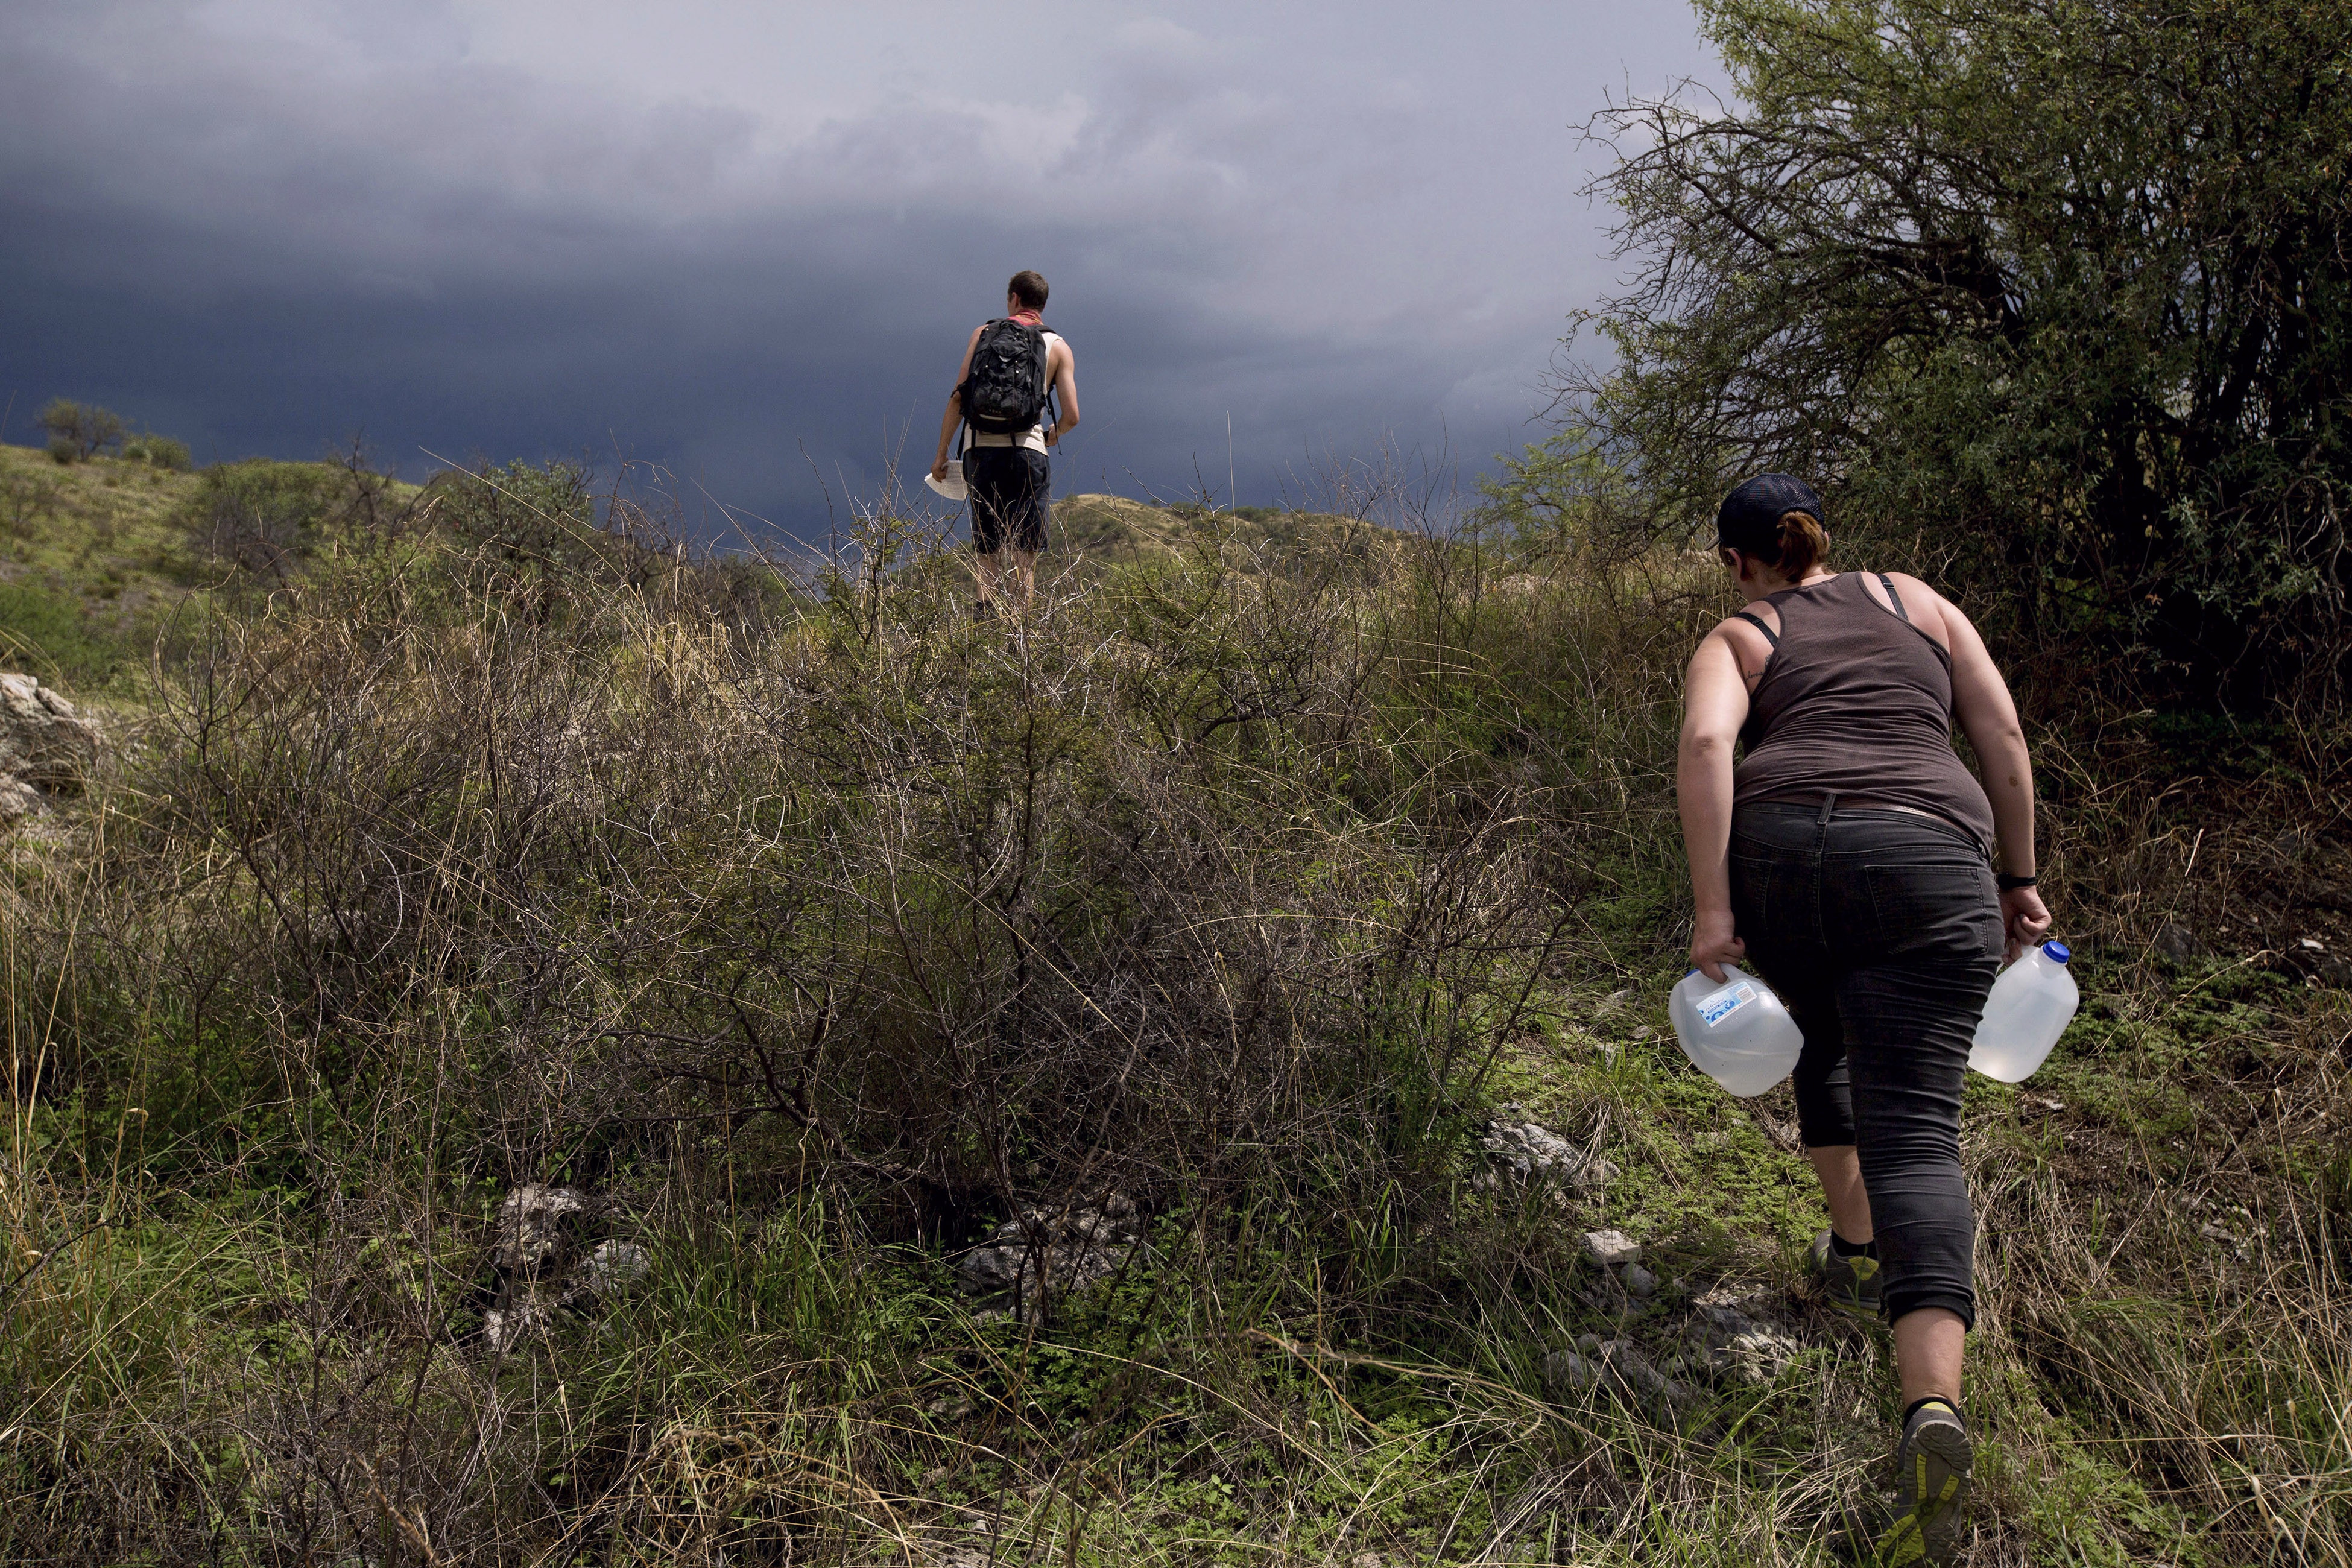 Volunteers with No More Deaths hike through the desert carrying water to drop for migrants near Arivaca, Ariz., on July 25, 2013. Photo: Josh Haner/The New York Times/Redux